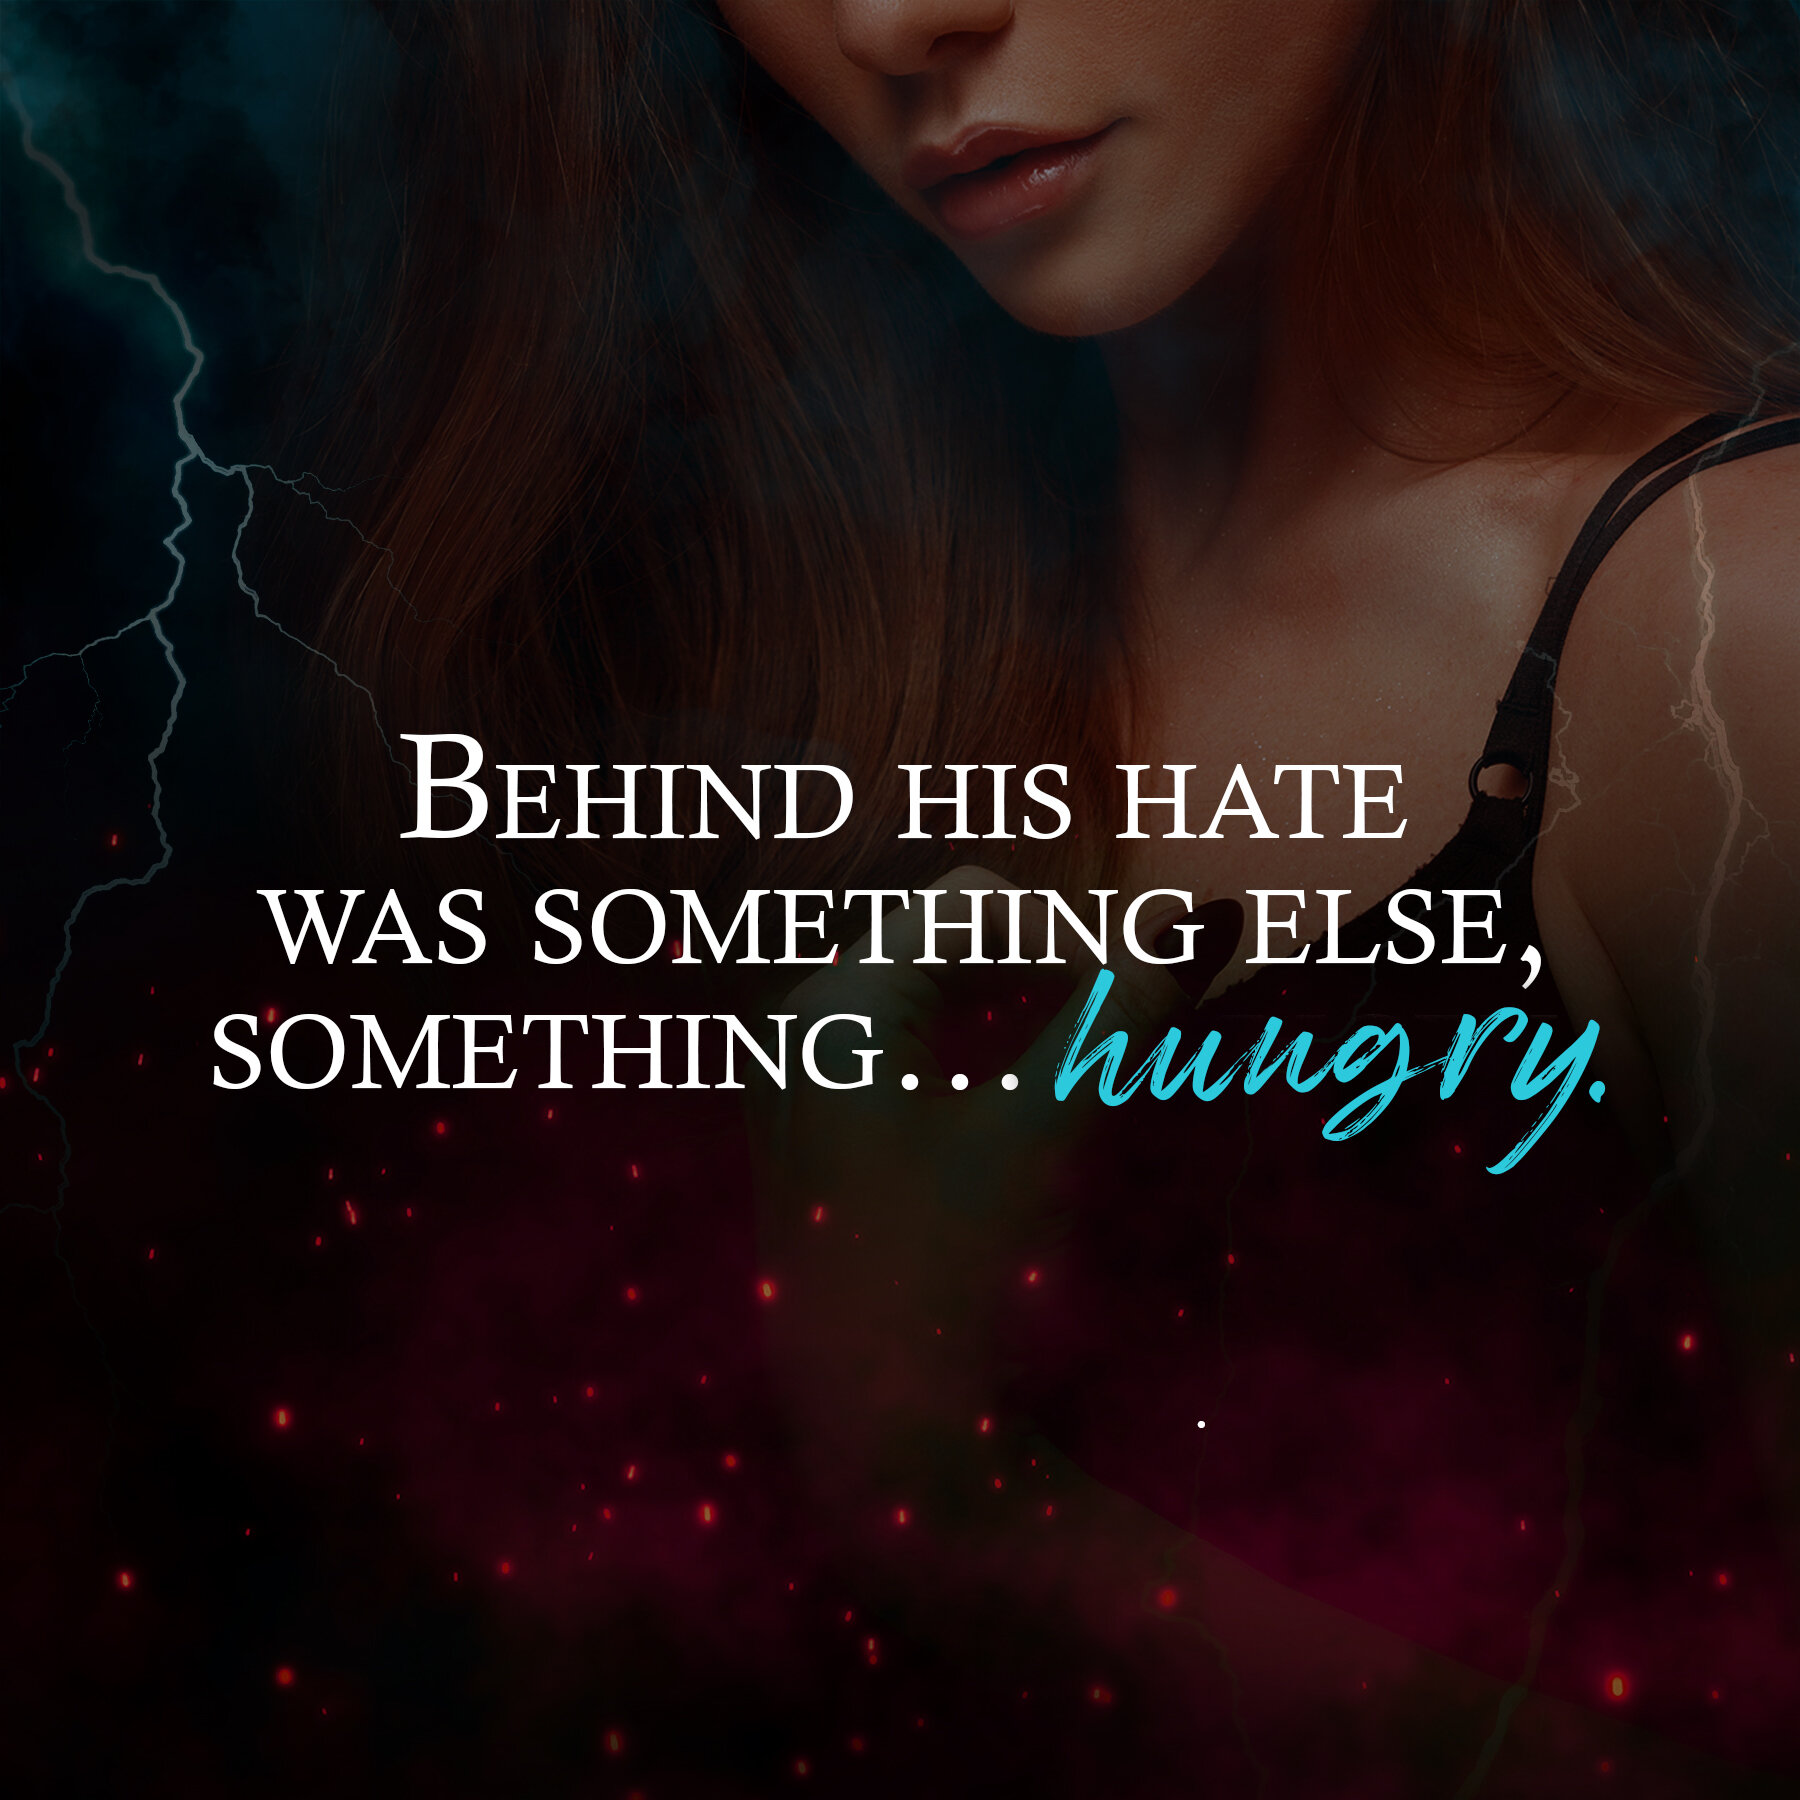 This close to danger, I should flee for my life, but I stood transfixed, witnessing his power and fury, all directed at me. 

But beneath it, behind his hate, was something else, something&hellip; ℎ𝑢𝑛𝑔𝑟𝑦.

🐺 Rejected Fate by Elena Forest
📖 htt